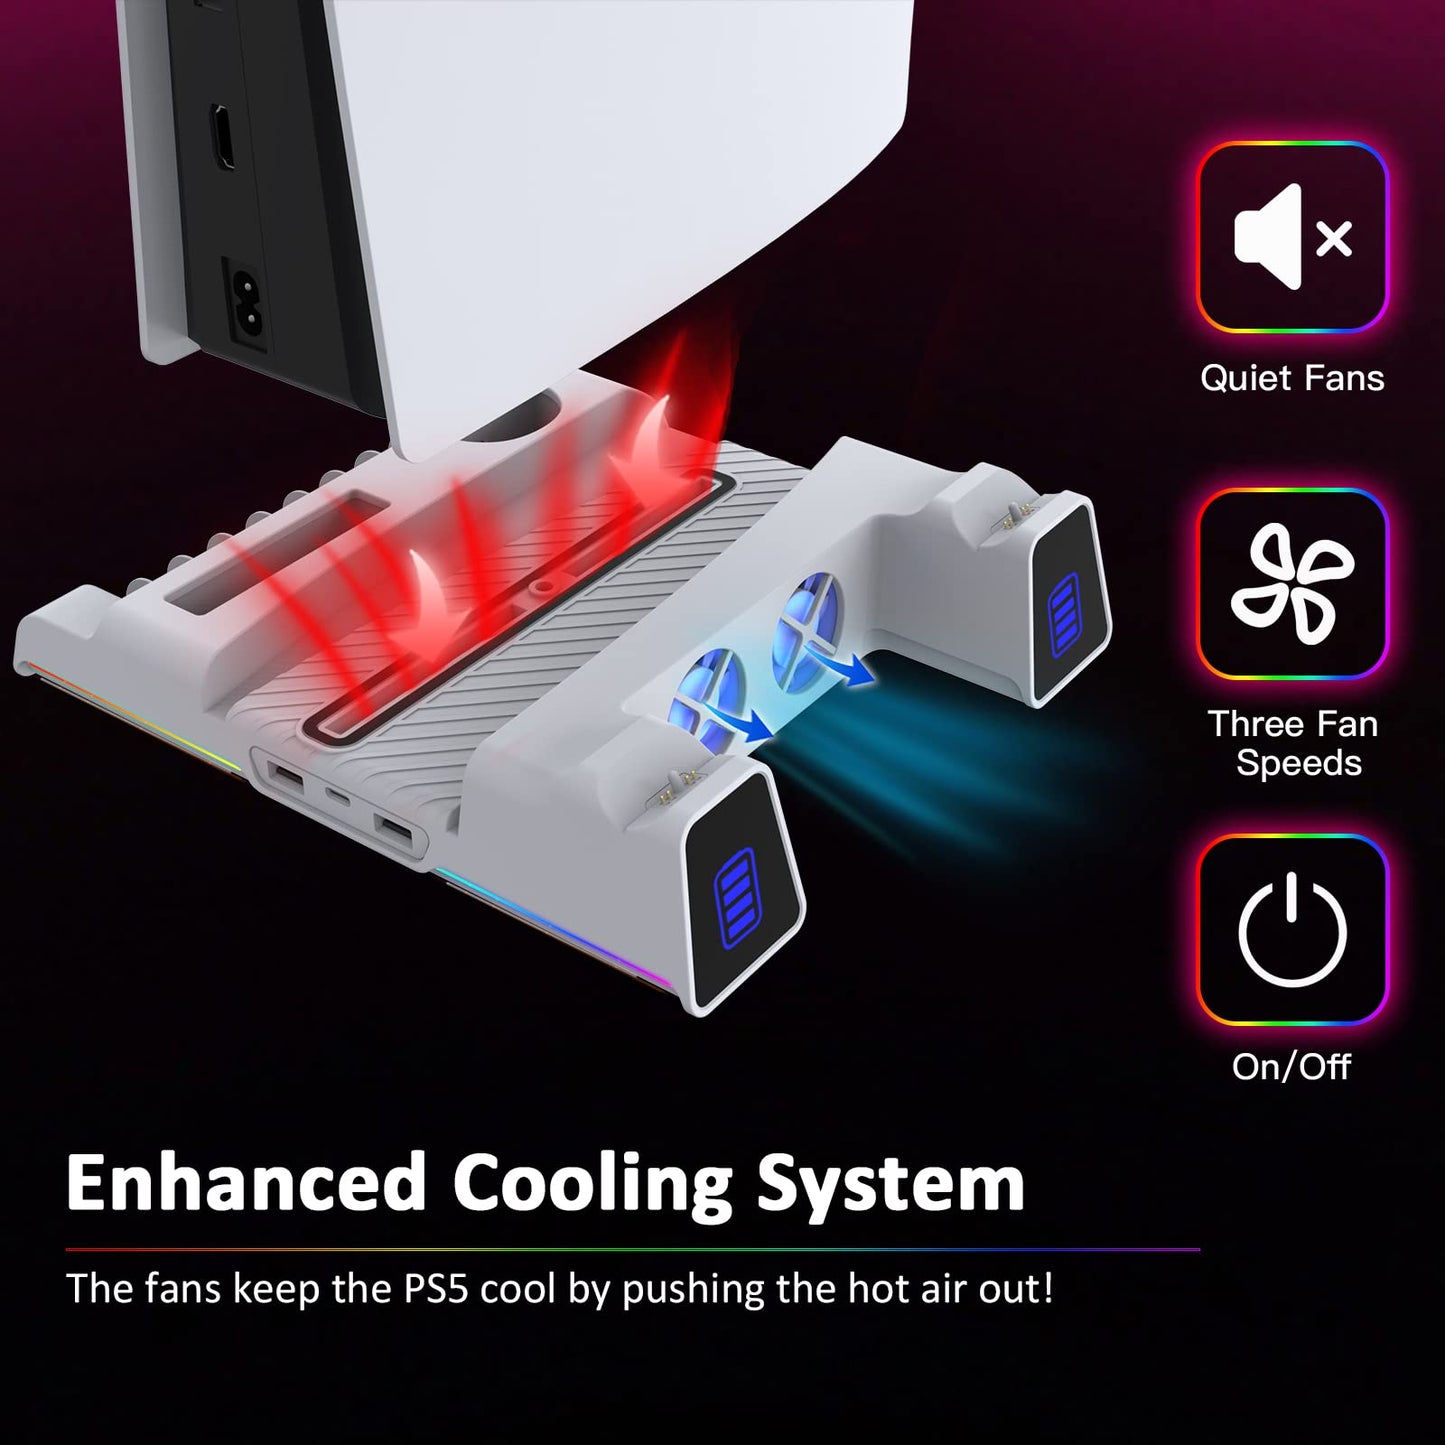 NexiGo PS5 Slient Cooling Stand with RGB LED Light, Dual Charging Station Compatible with DualSense Edge Controller, Hard Drive Slot, Headset and Remote Holders, 10 Game Slots, White - amzGamess